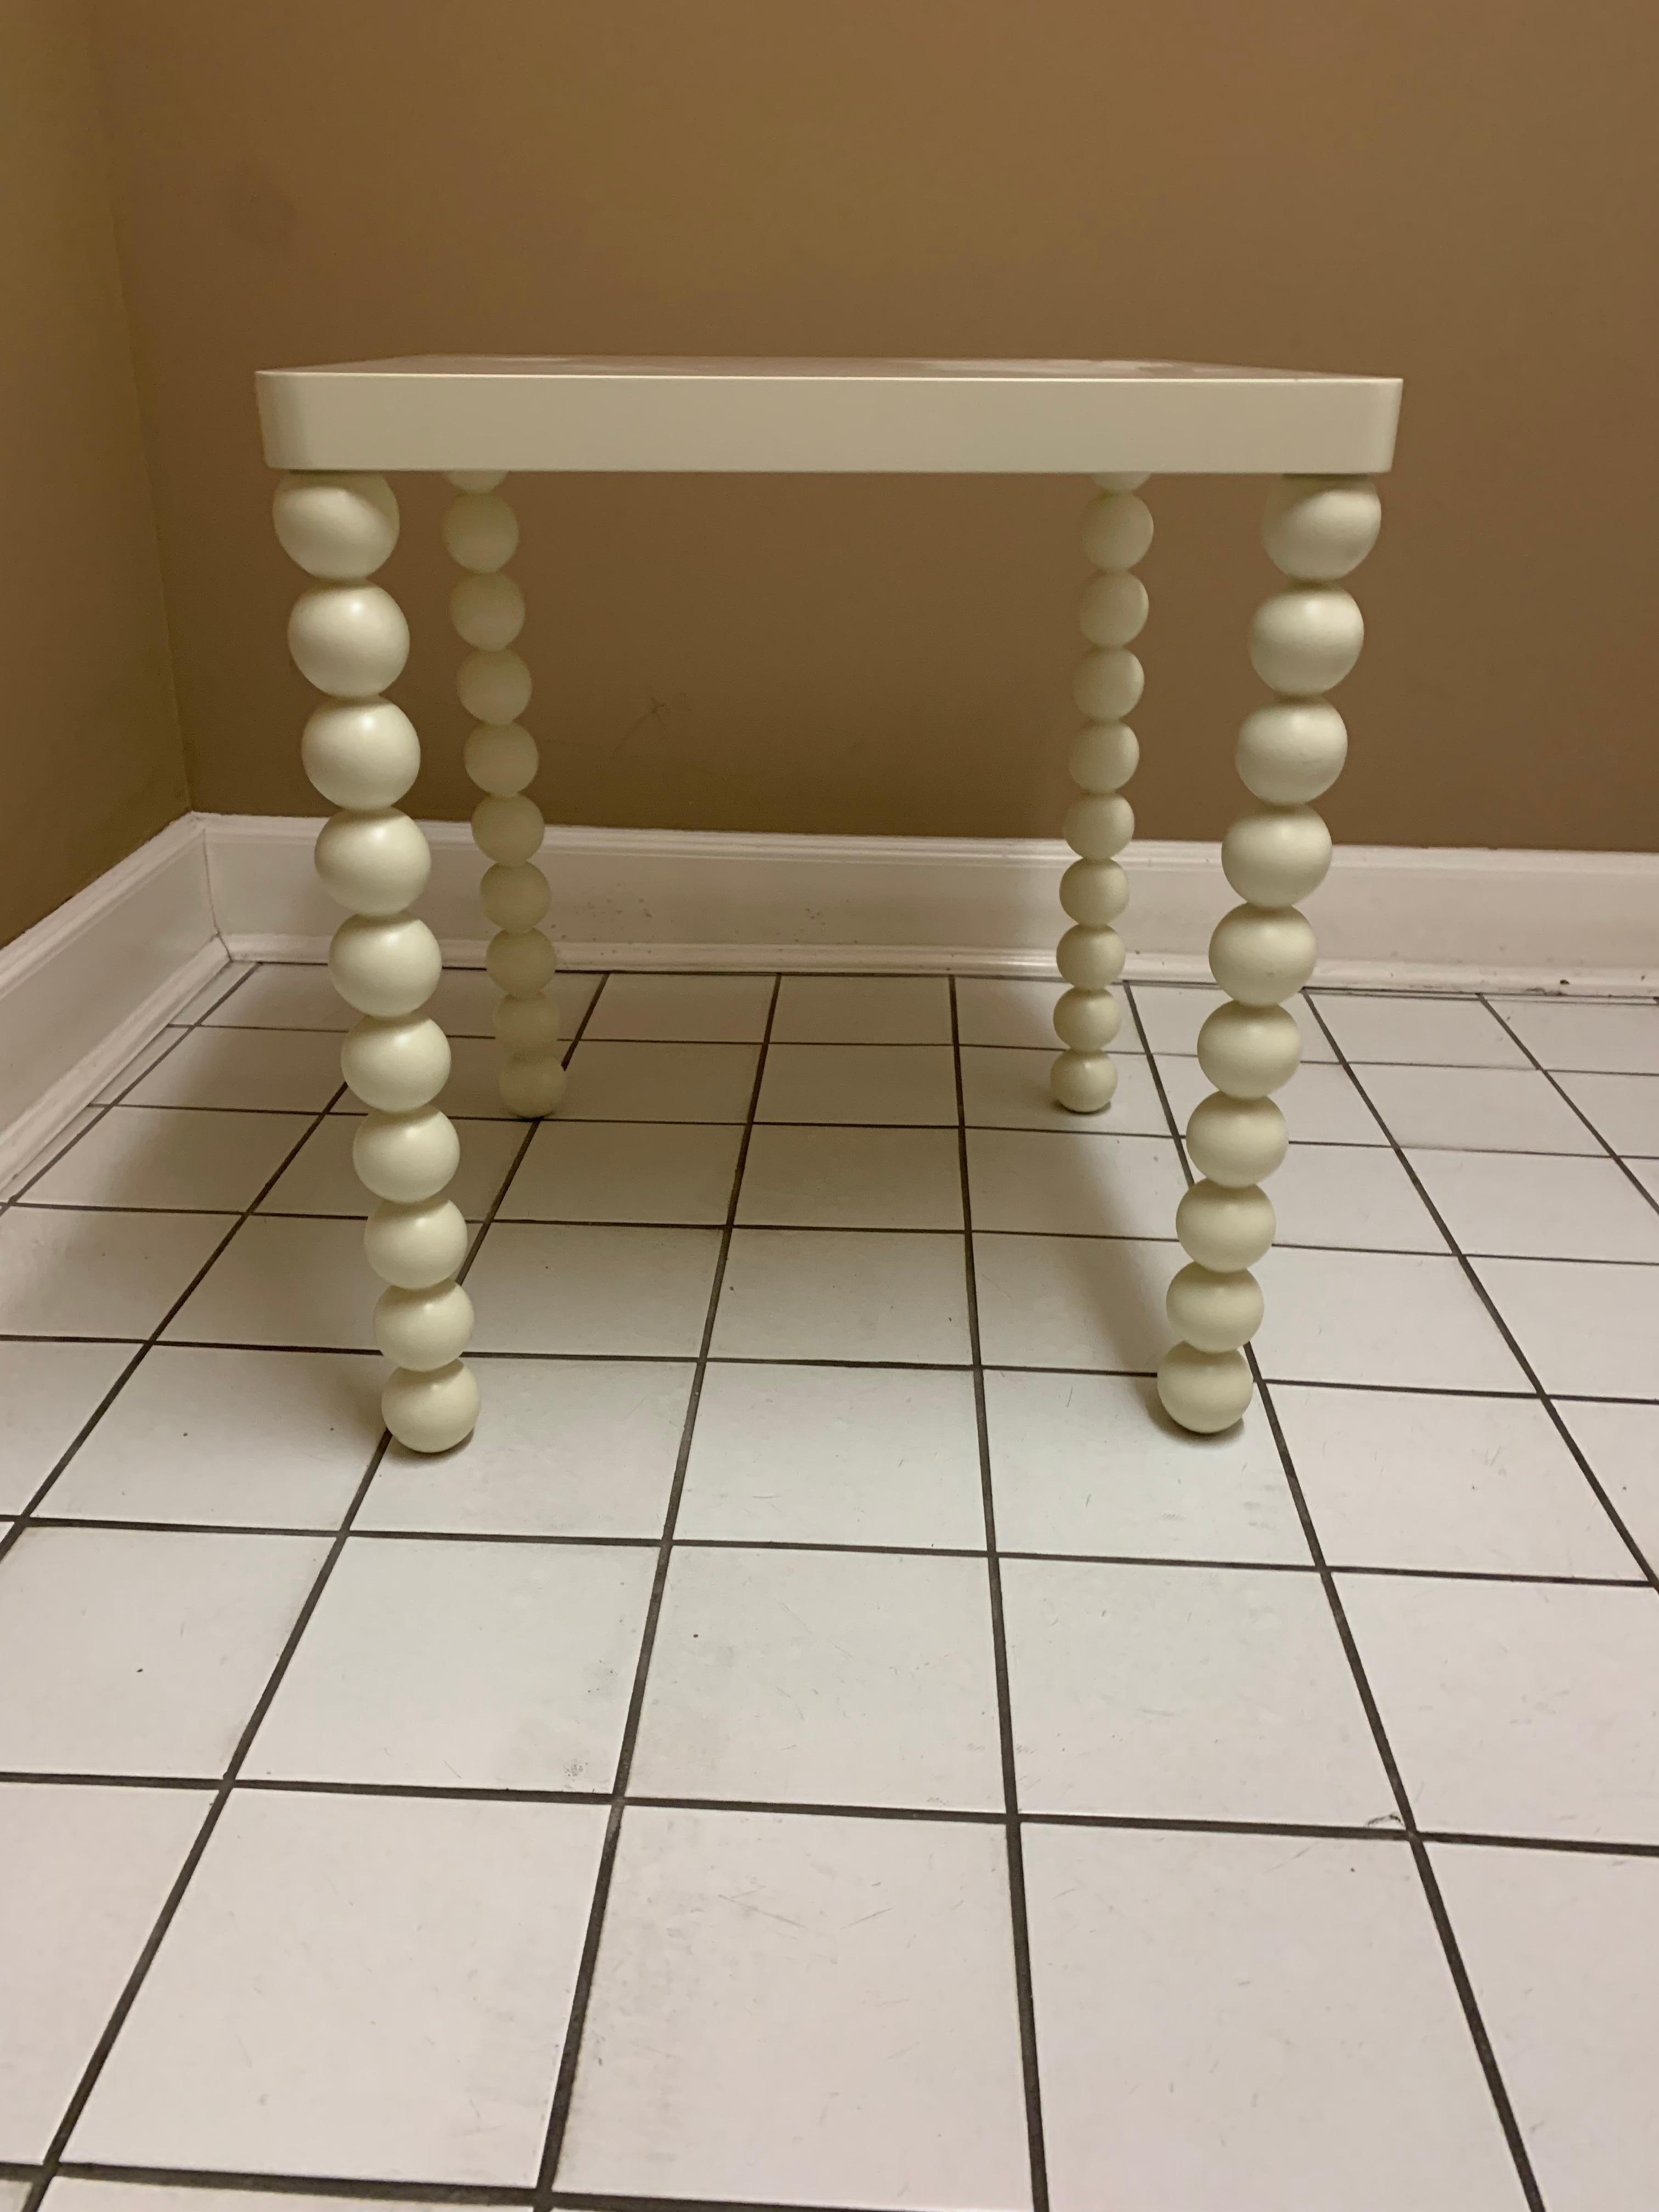 Vintage 1970s off-white wood table with carved rounded legs
perfect for a kitchen table, game table, or in a child's playroom
white hand painted, substantial, and those legs!
Incredibly carved legs make this a one of a kind piece!
Slight chip in